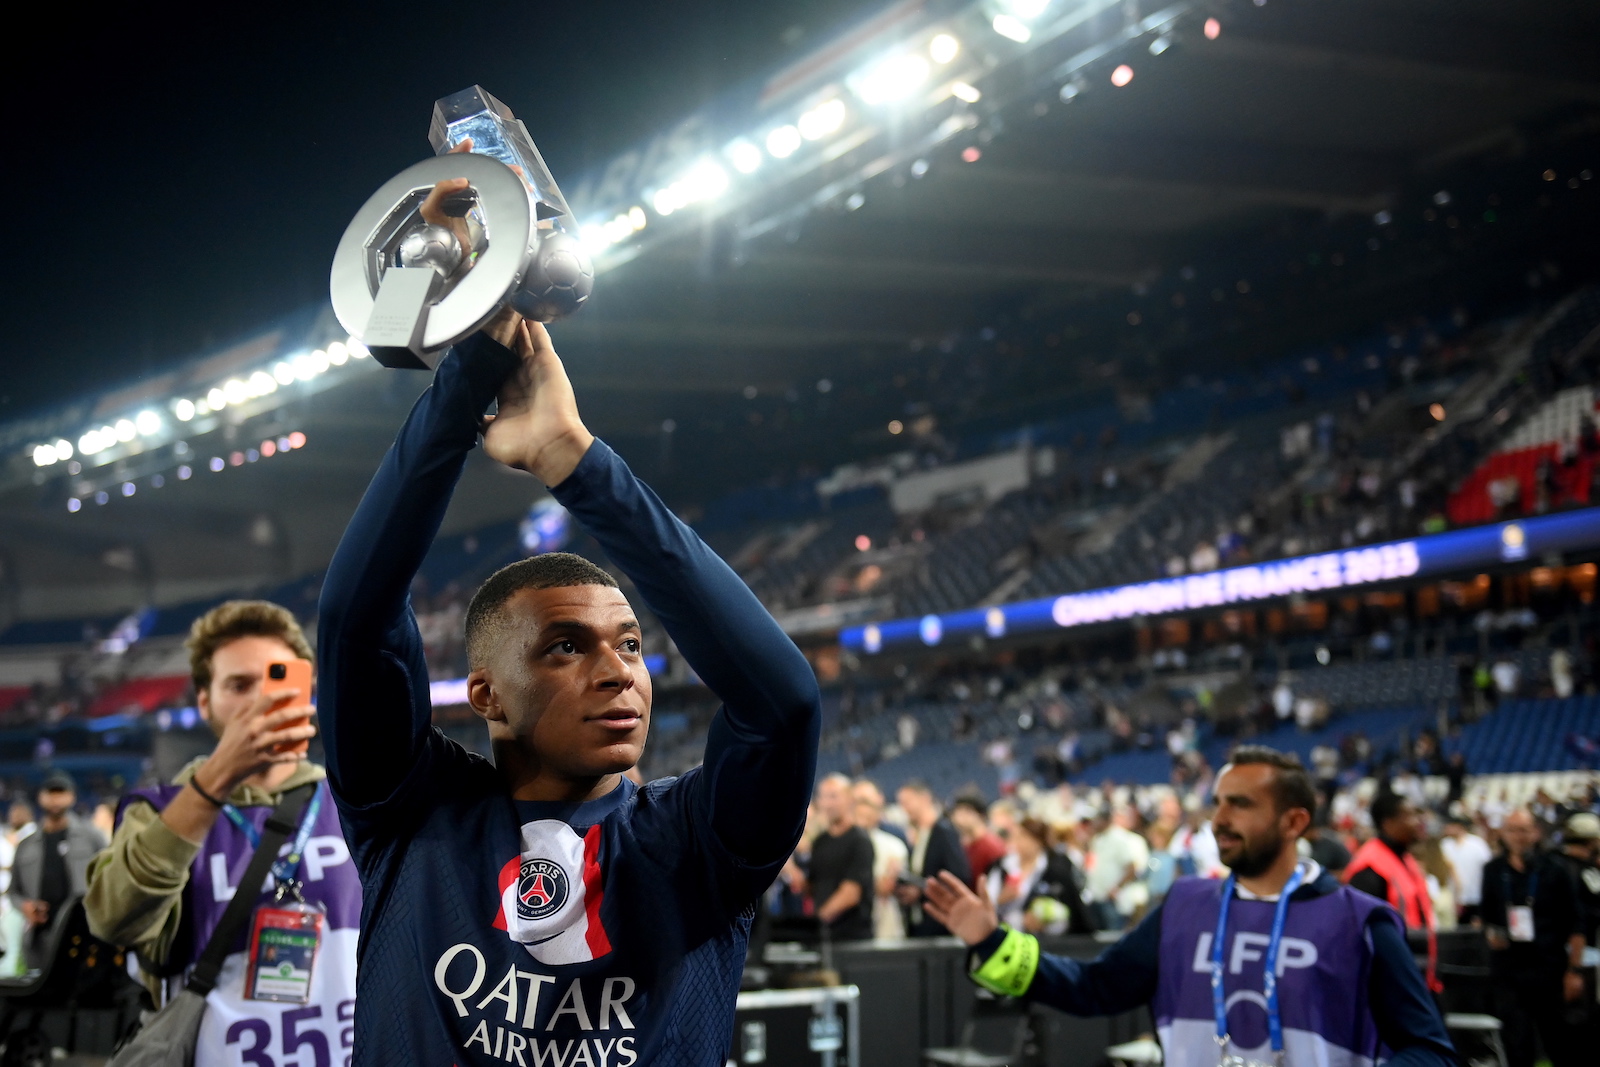 epa10671720 Paris Saint-Germain's French forward Kylian Mbappe lifts his trophy during the 2022-2023 Ligue 1 championship trophy ceremony following the French Ligue 1 soccer match between Paris Saint Germain and Clermont Foot 63 in Paris, France, 03 June 2023.  EPA/FRANCK FIFE / POOL  MAXPPP OUT